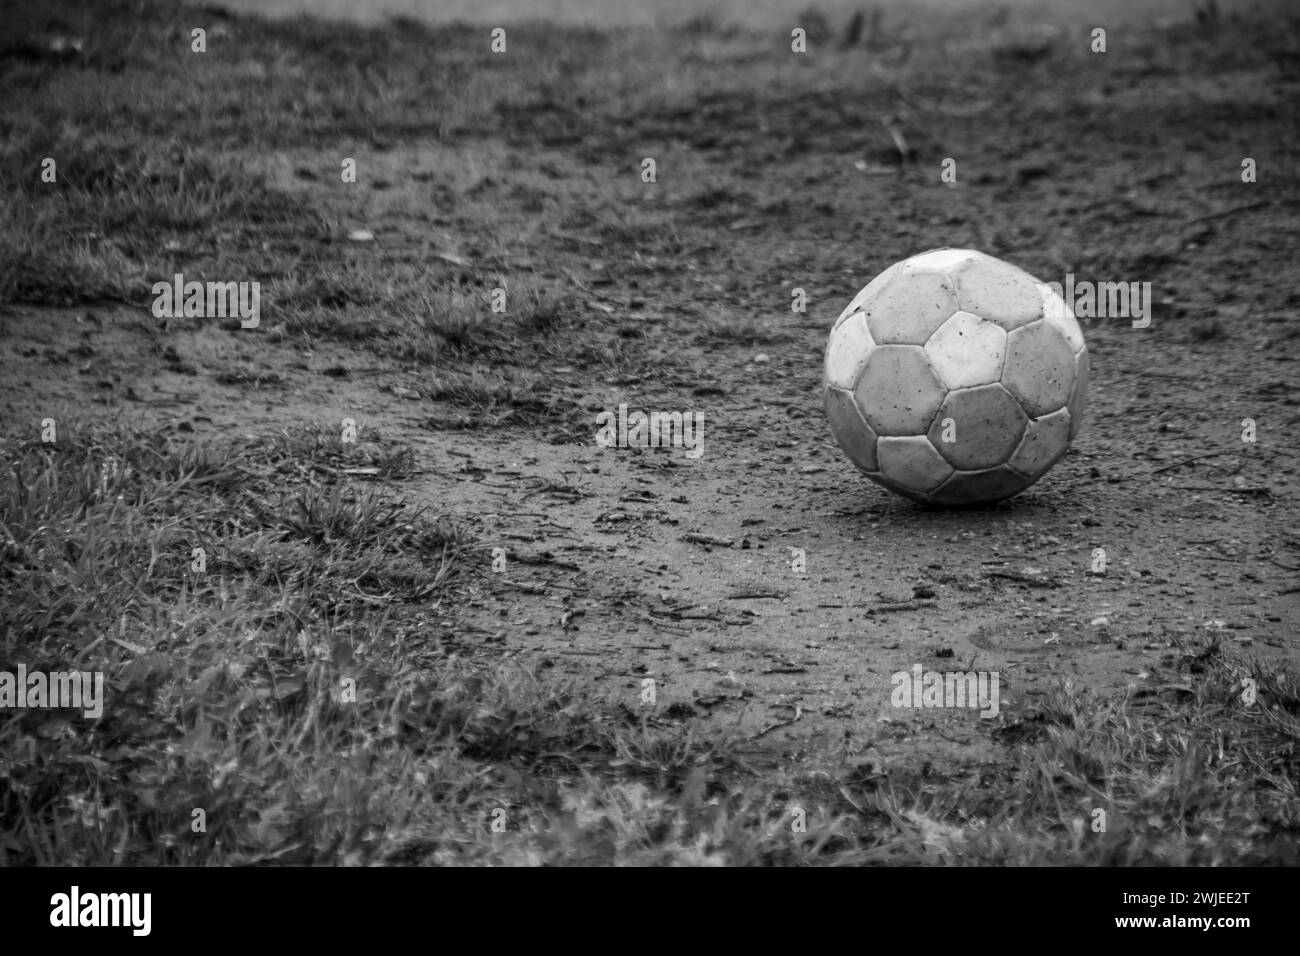 A solitary black and white soccer ball resting on an empty field Stock Photo